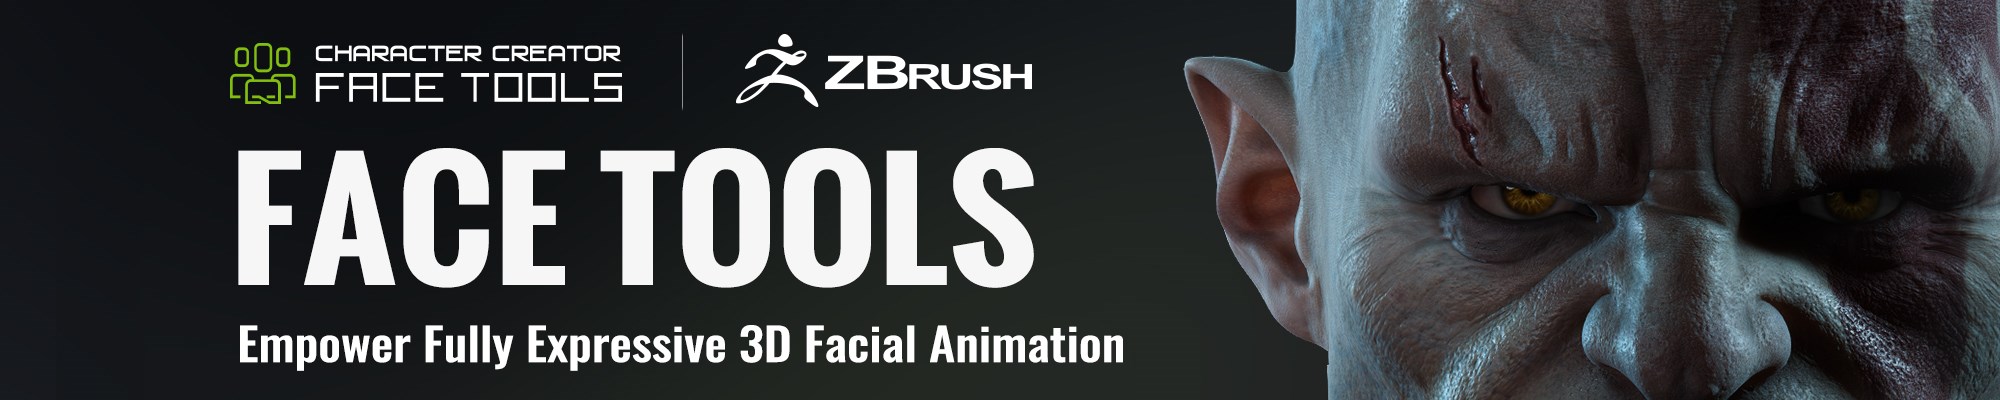 CC ZBrush Face Tools - Empower Fully Expressive 3D Facial Animation